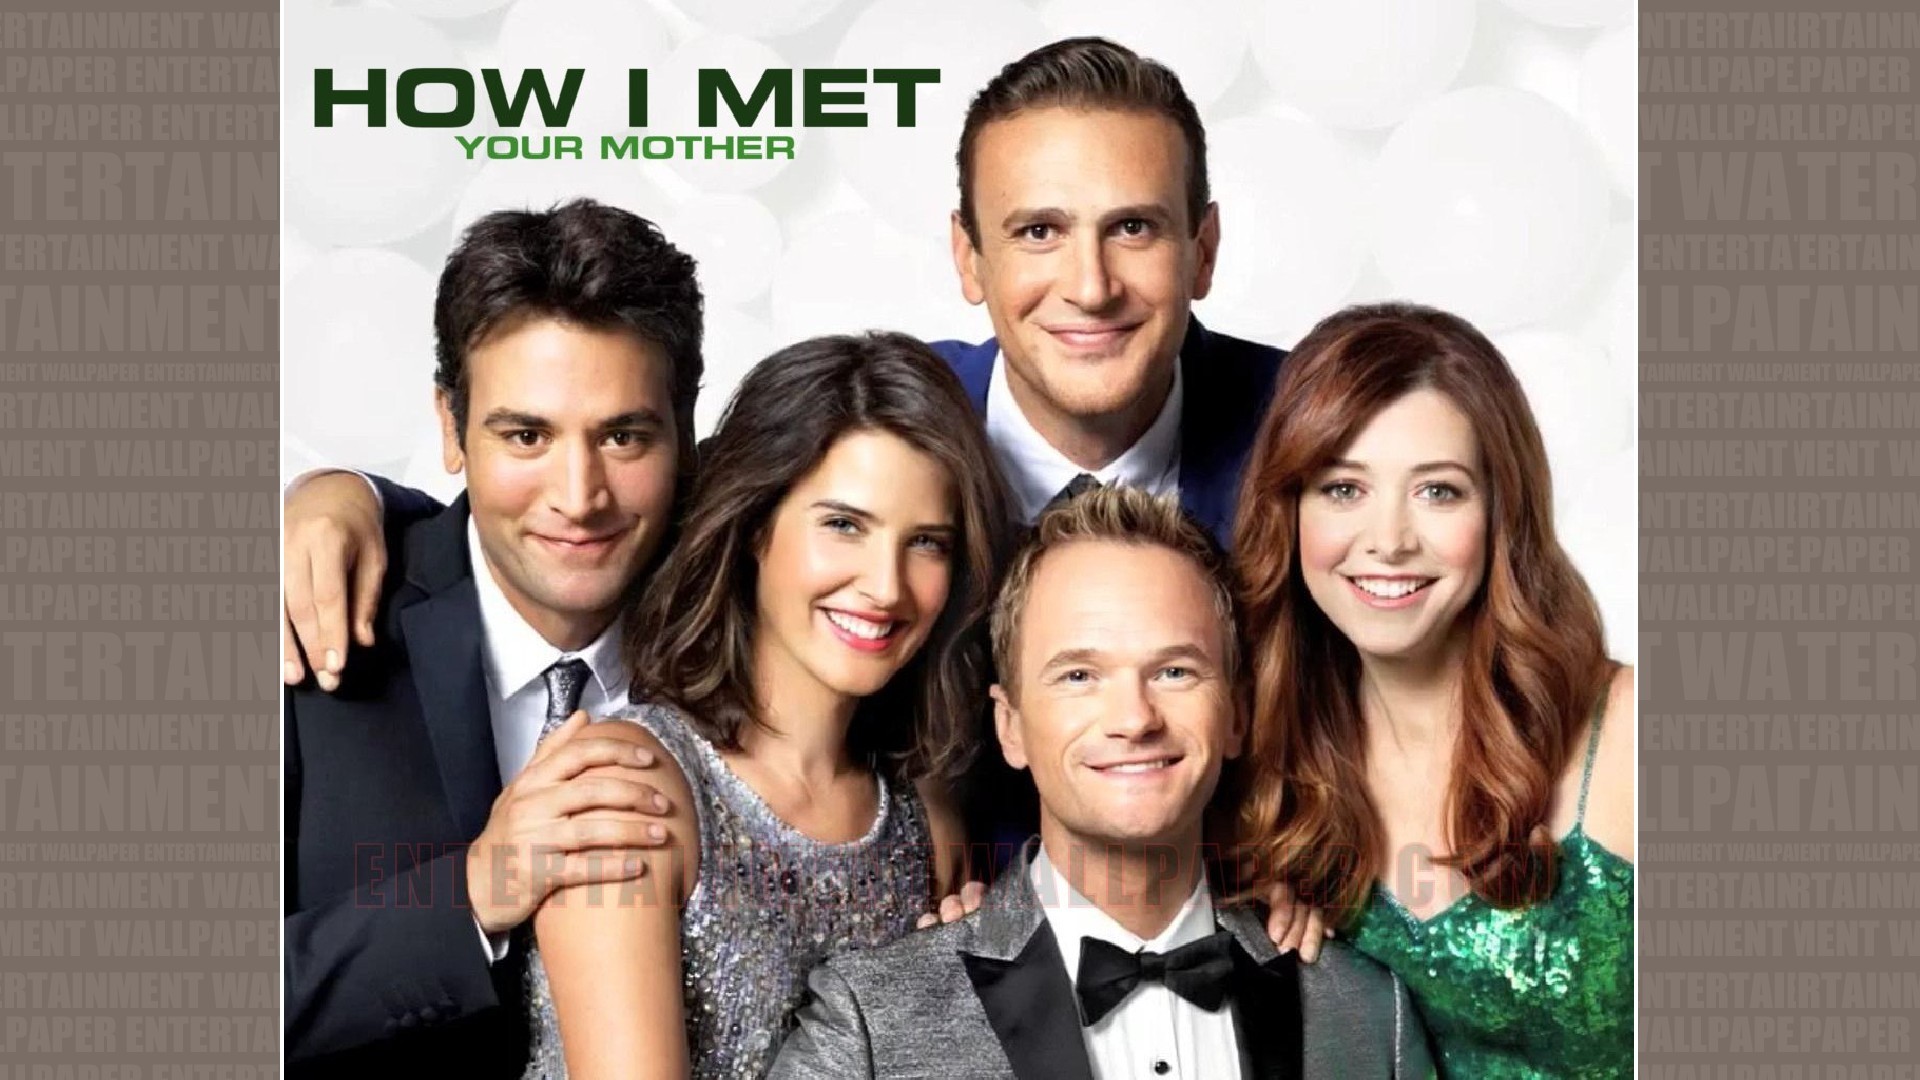 how i met your mother wallpaper,people,social group,youth,fun,smile